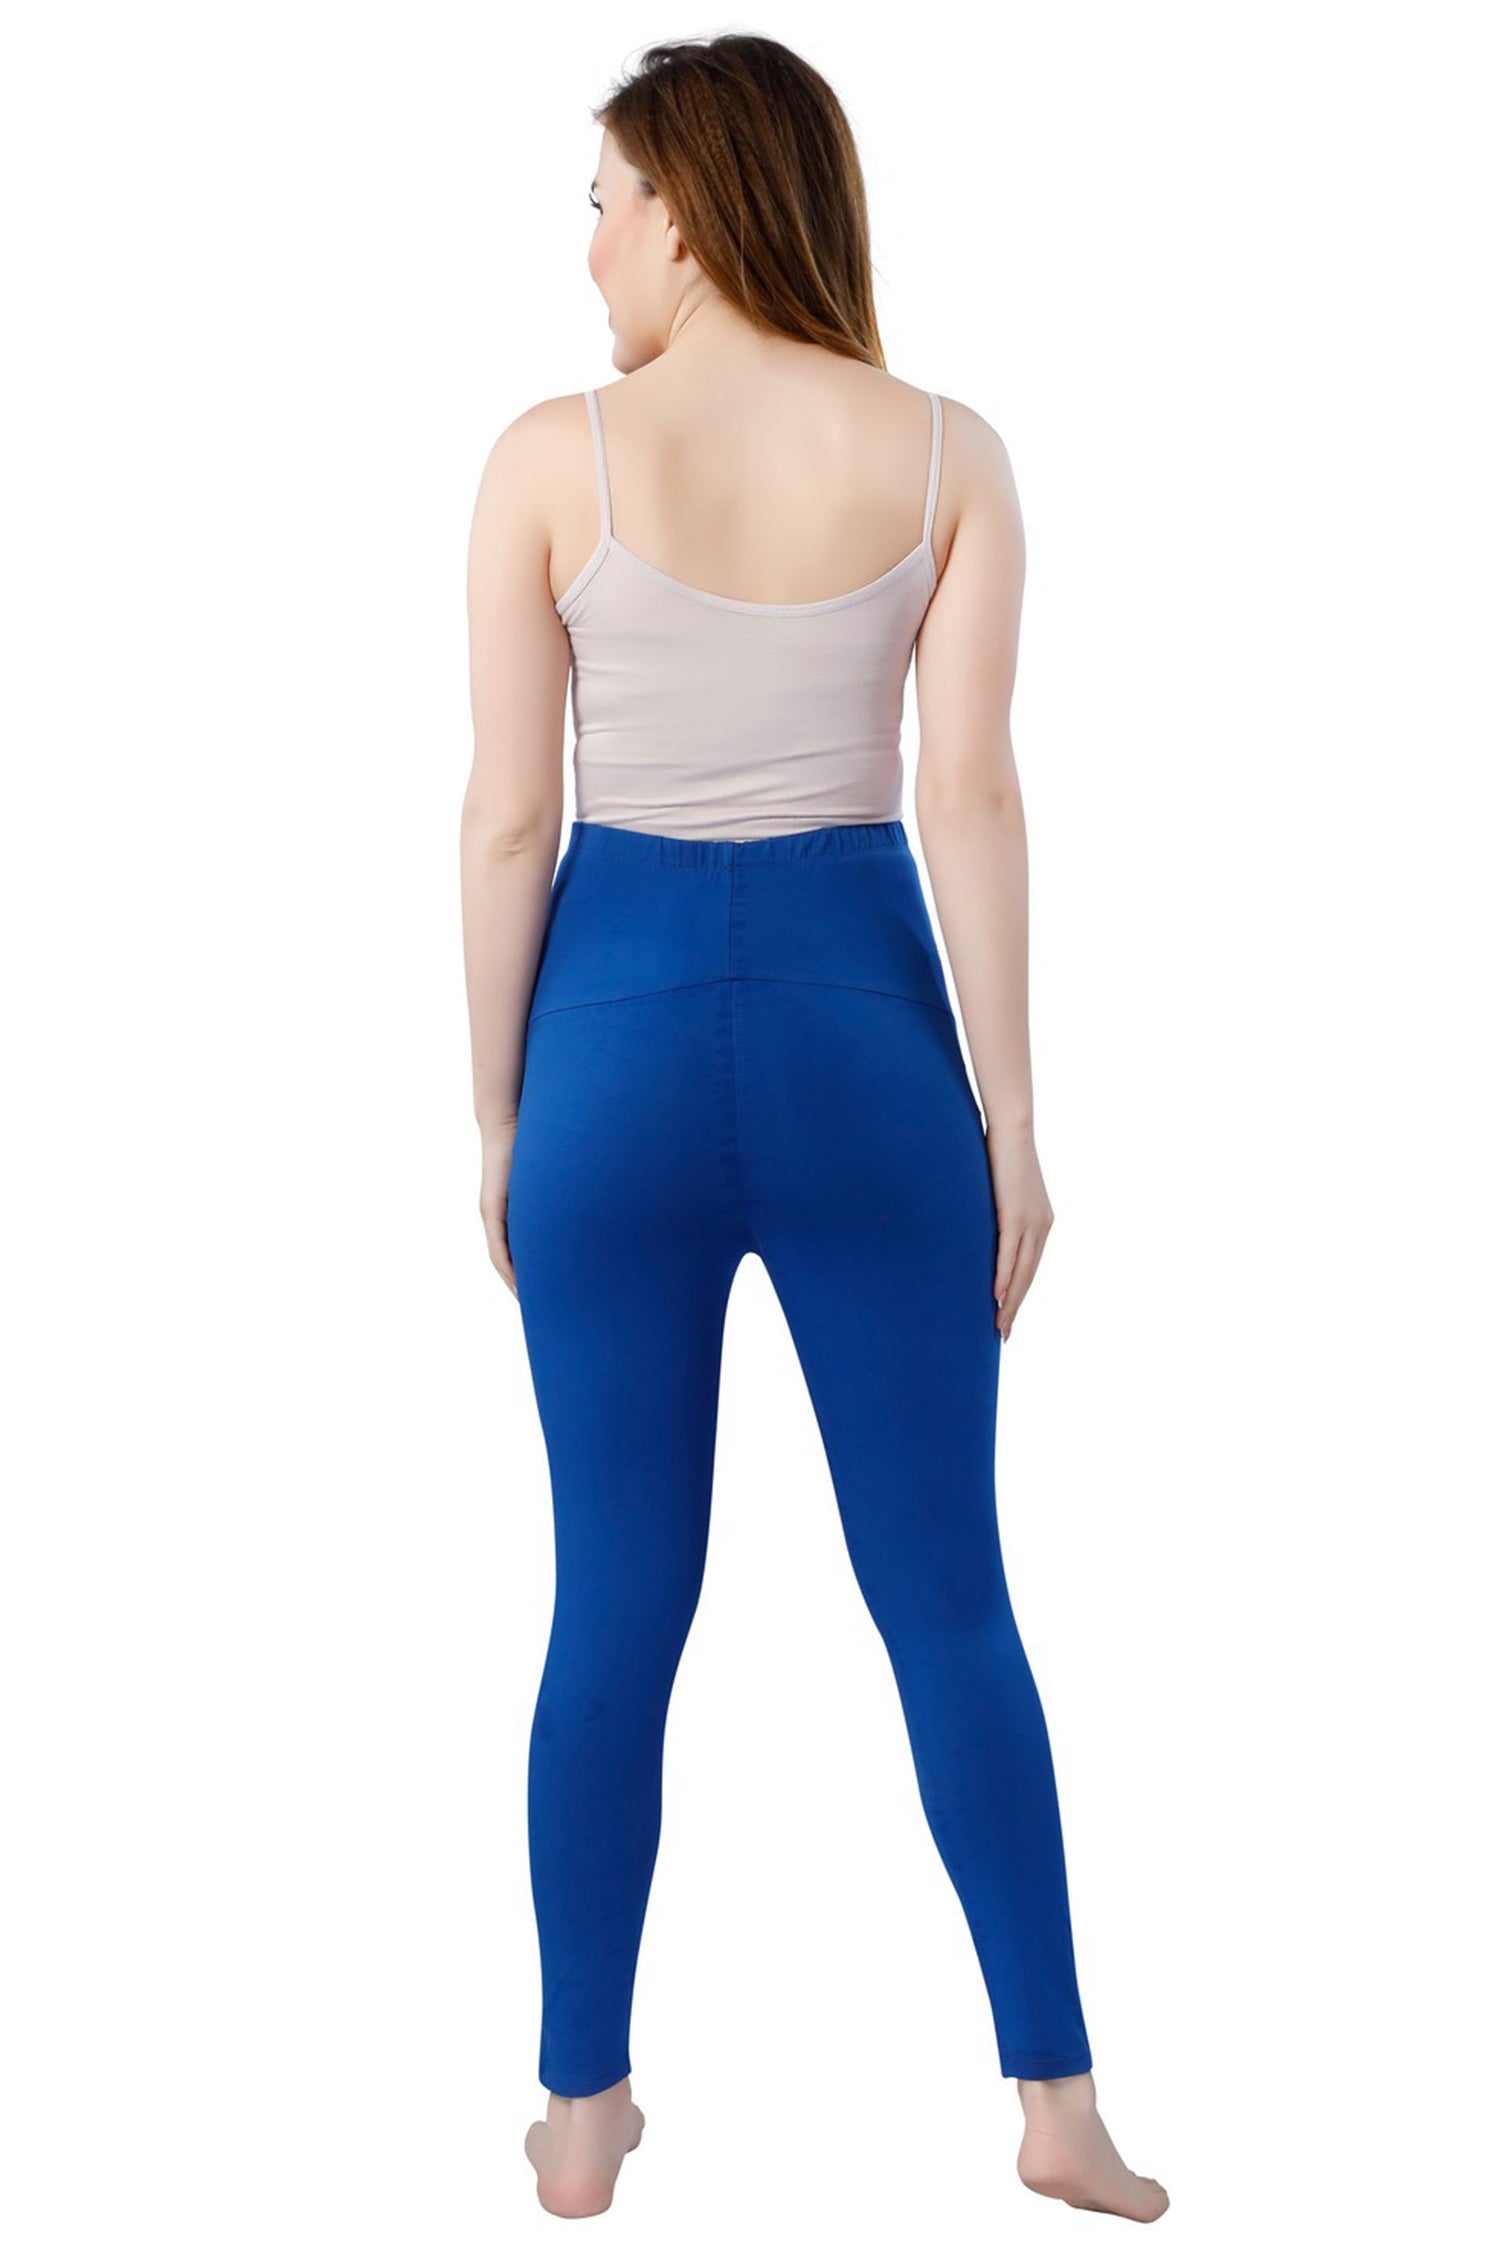 Free People Plank All Day Leggings Electric Cobalt XS-S (US Women's 0-6) at  Amazon Women's Clothing store